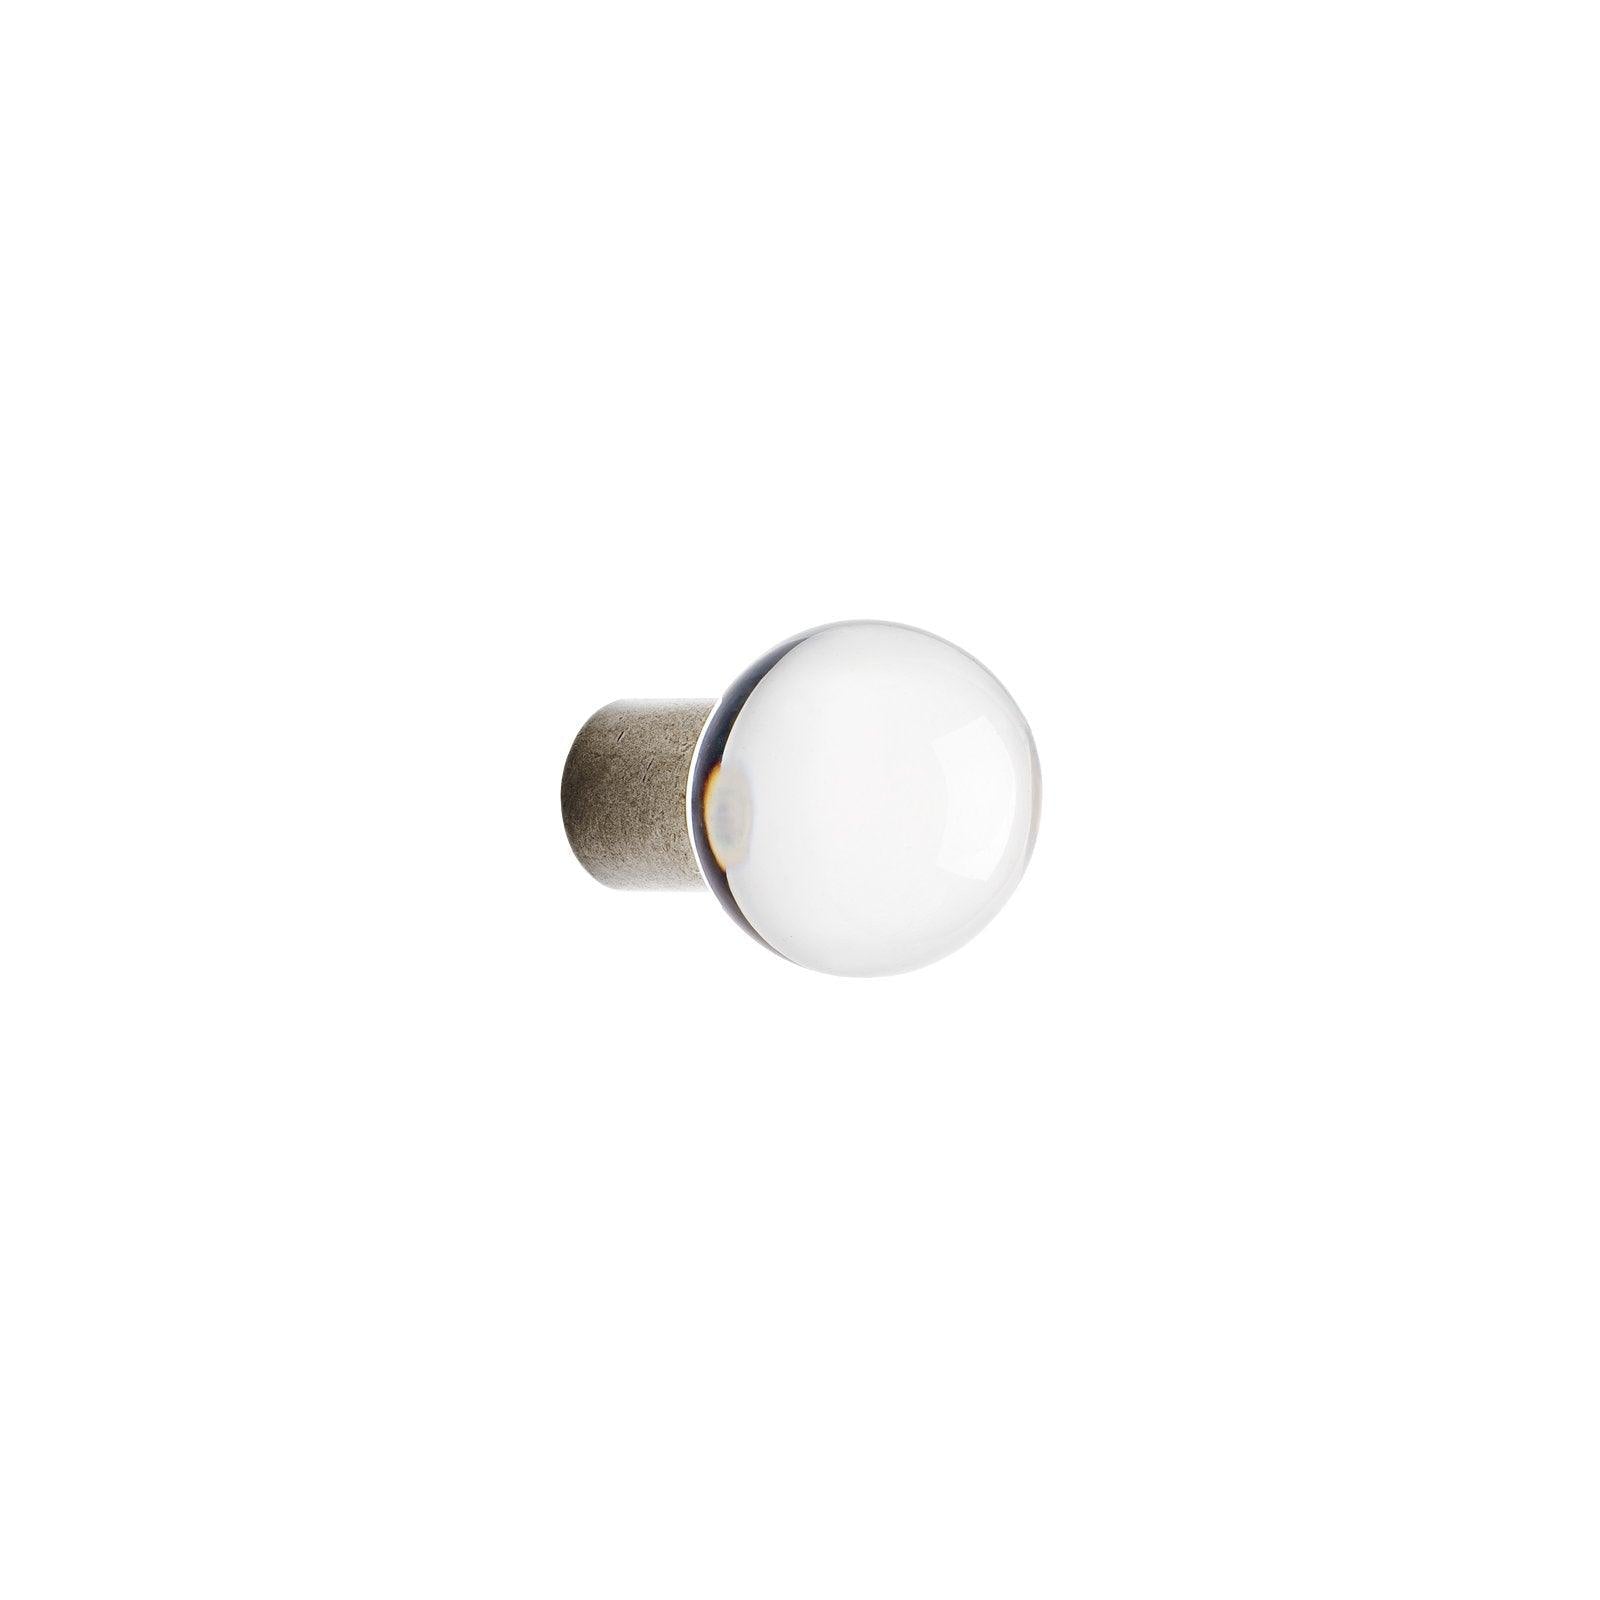 CK155 - 1 3/8" Round Crystal Cabinet Knob - {{ show.name }}